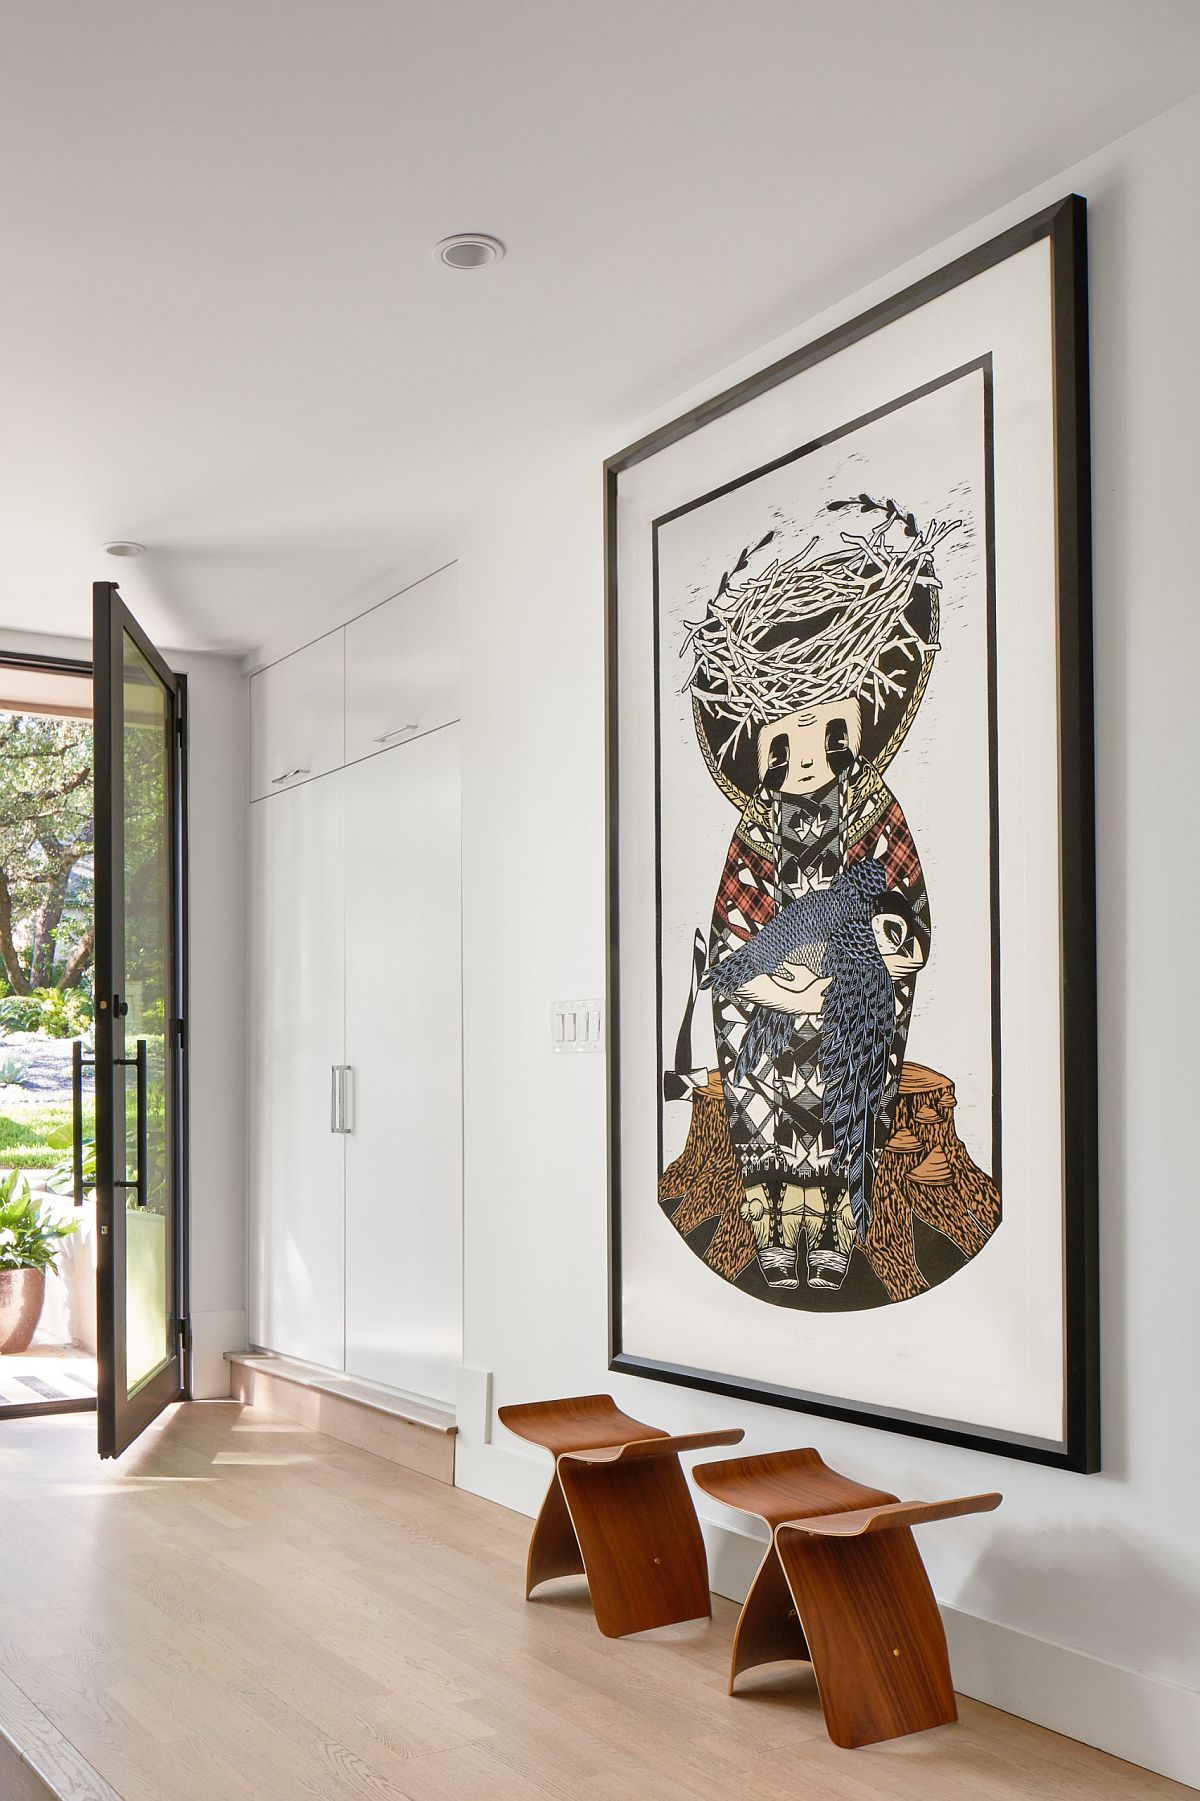 Awesome wall art steals the show in this spacious white modern entry space